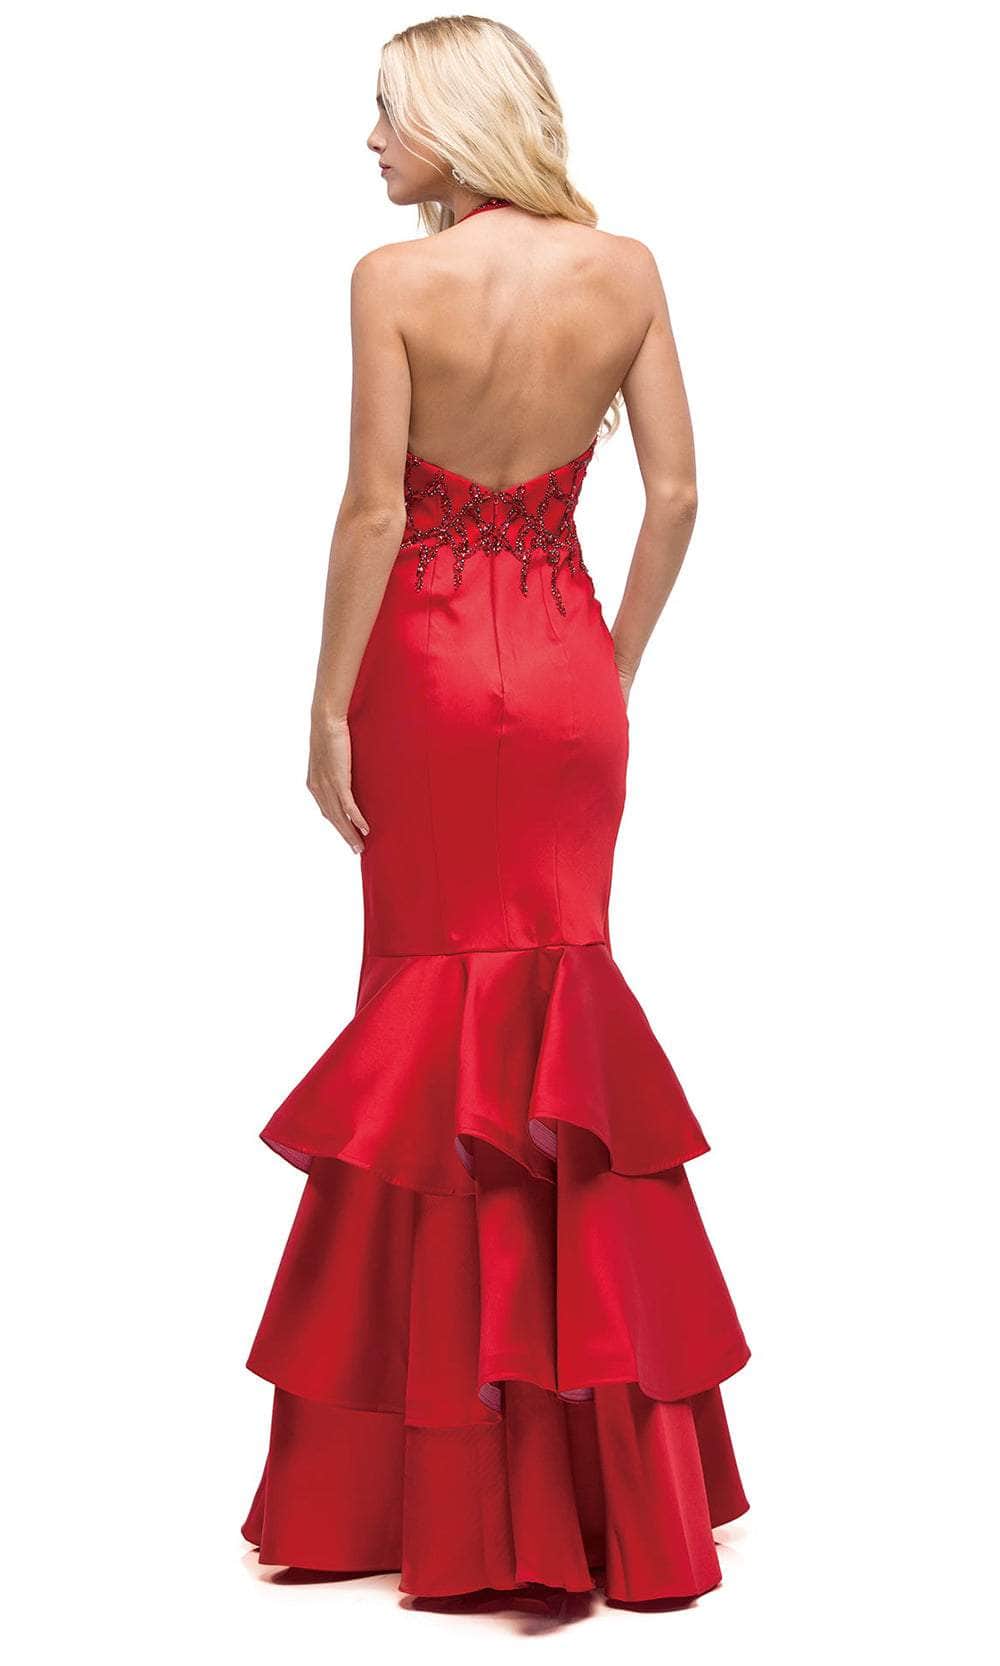 Dancing Queen 9910 - Backless Embellished Prom Gown Prom Dresses 